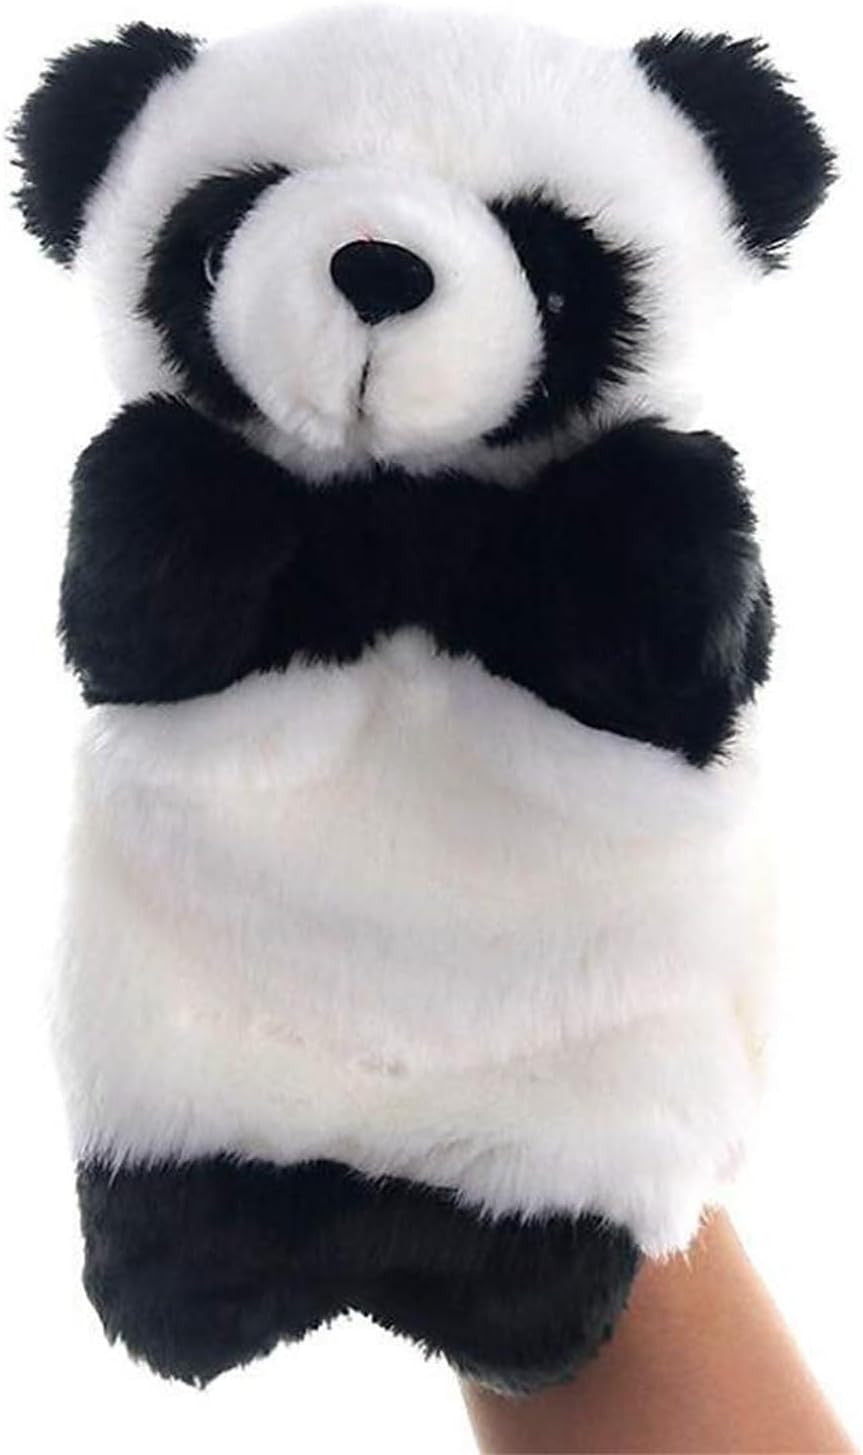 Bolivia's Hand Puppets, Panda Stuffed Animal Toy, Panda Plush Toys, Panda Hand Puppets Kids Toys, Cute Soft Plush Panda Toy, Panda Plush Interactive Toy for Boys Girls Age 4-8